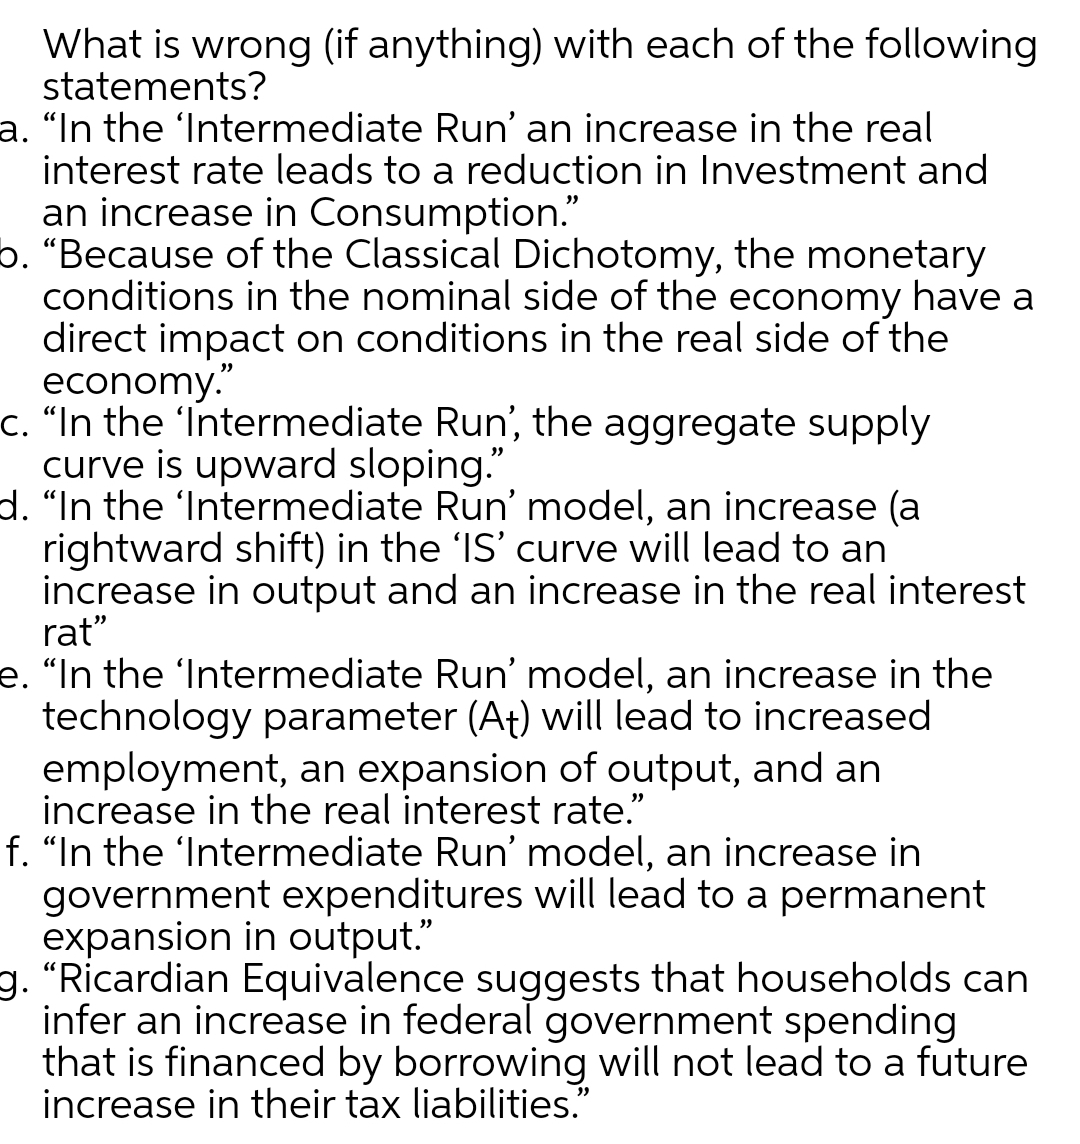 What is wrong (if anything) with each of the following
statements?
a. “In the 'Intermediate Run' an increase in the real
interest rate leads to a reduction in Investment and
an increase in Consumption."
5. "Because of the Classical Dichotomy, the monetary
conditions in the nominal side of the economy have a
direct impact on conditions in the real side of the
economy."
c. "In the 'Intermediate Run', the aggregate supply
curve is upward sloping."
d. "In the 'Intermediate Run' model, an increase (a
rightward shift) in the 'IS' curve will lead to an
increase in output and an increase in the real interest
rat"
e. "In the 'Intermediate Run' model, an increase in the
technology parameter (A†) will lead to increased
employment, an expansion of output, and an
increase in the real interest rate."
f. "In the 'Intermediate Run' model, an increase in
government expenditures will lead to a permanent
expansion in output."
g. "Ricardian Equivalence suggests that households can
infer an increase in federal government spending
that is financed by borrowing will not lead to a future
increase in their tax liabilities."
